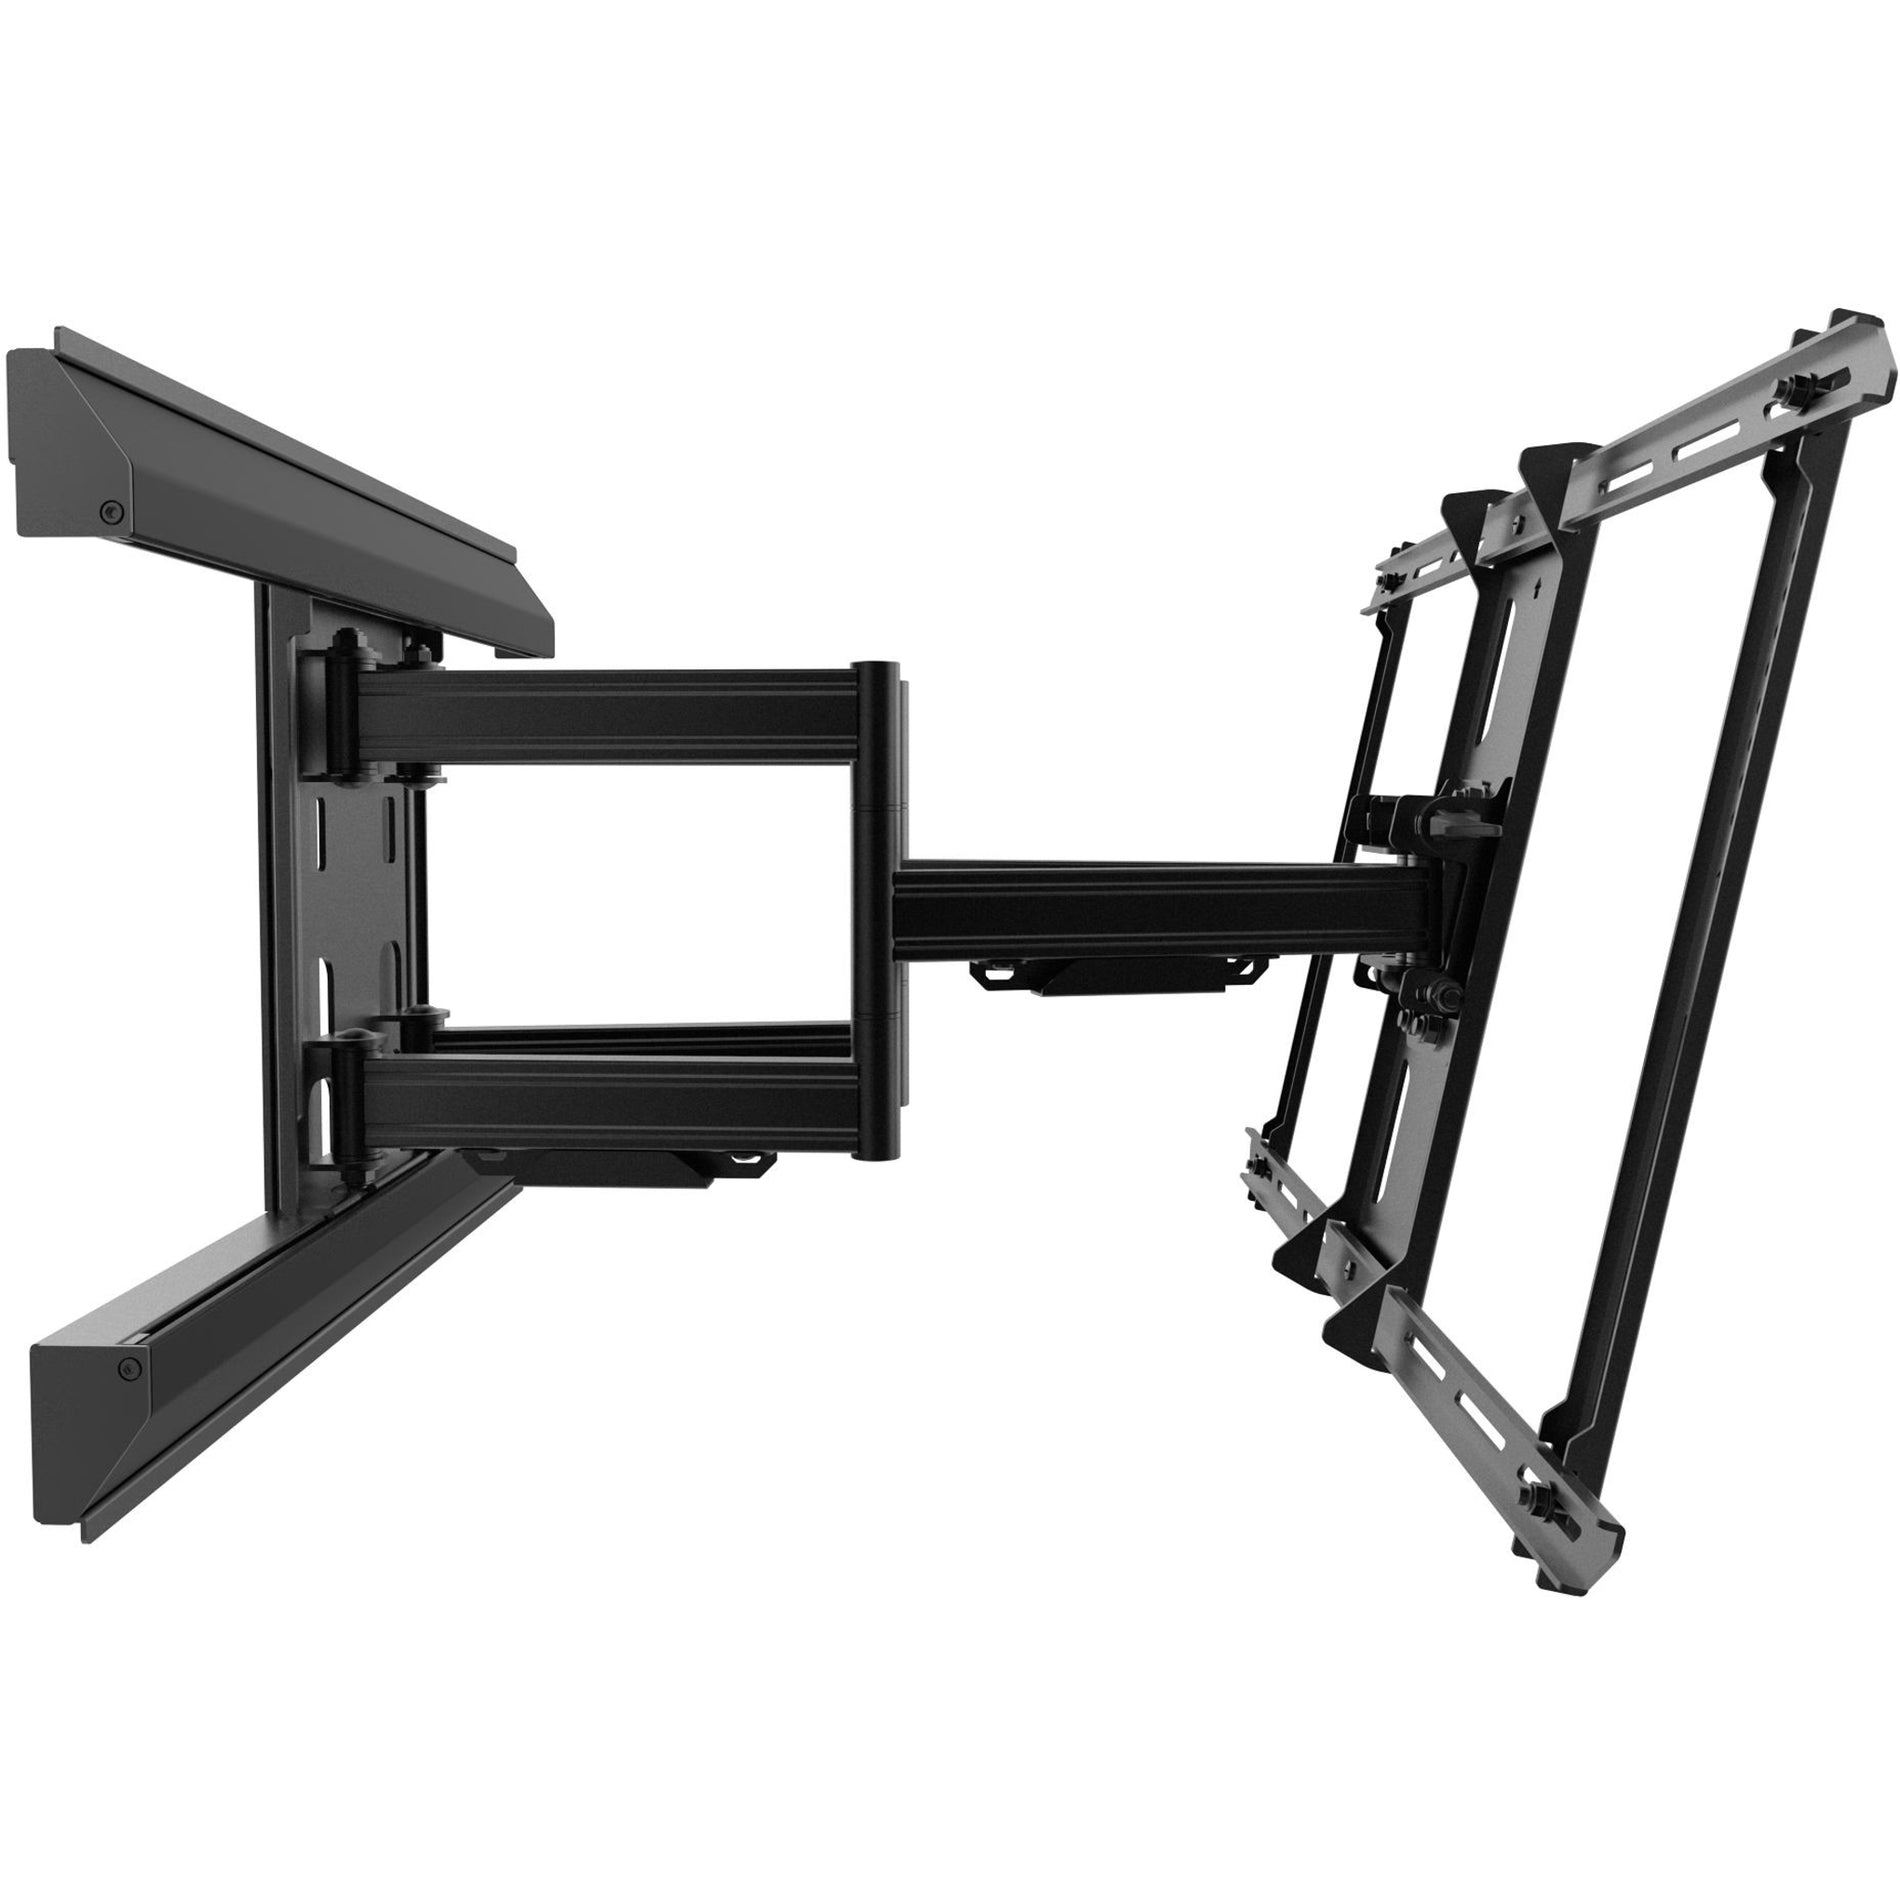 Kanto PMX660 Pro Series Full Motion TV Wall Mount for 37-inch to 80-inch TVs, Tilt, Adjustable, Retractable, Cable Management, Black